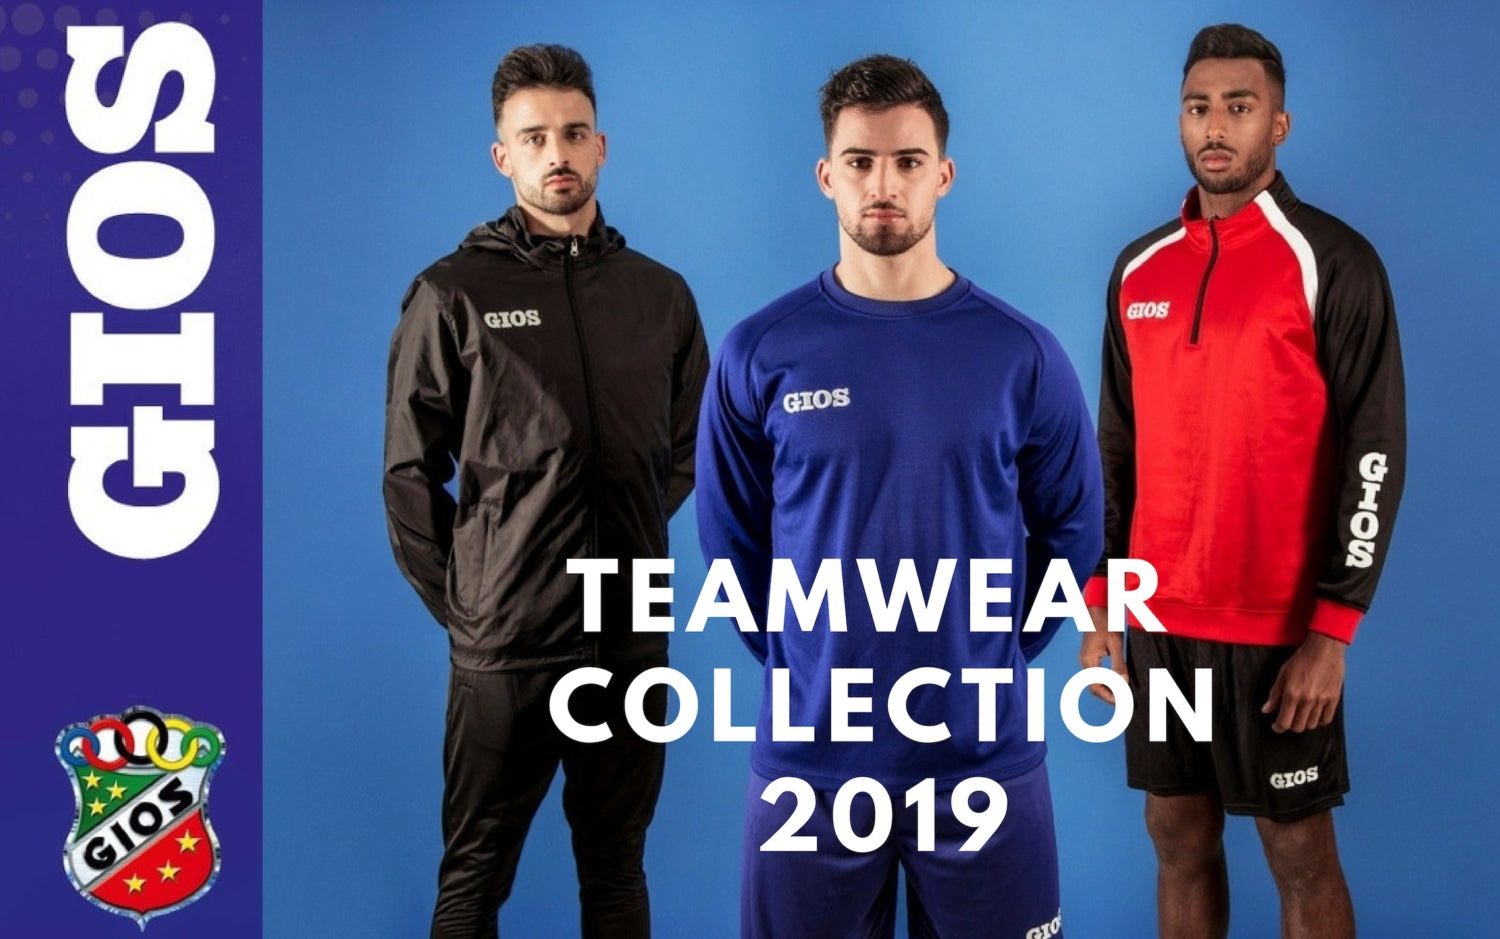 GIOS PRESENTS HIS NEW TEAMWEAR COLLECTION